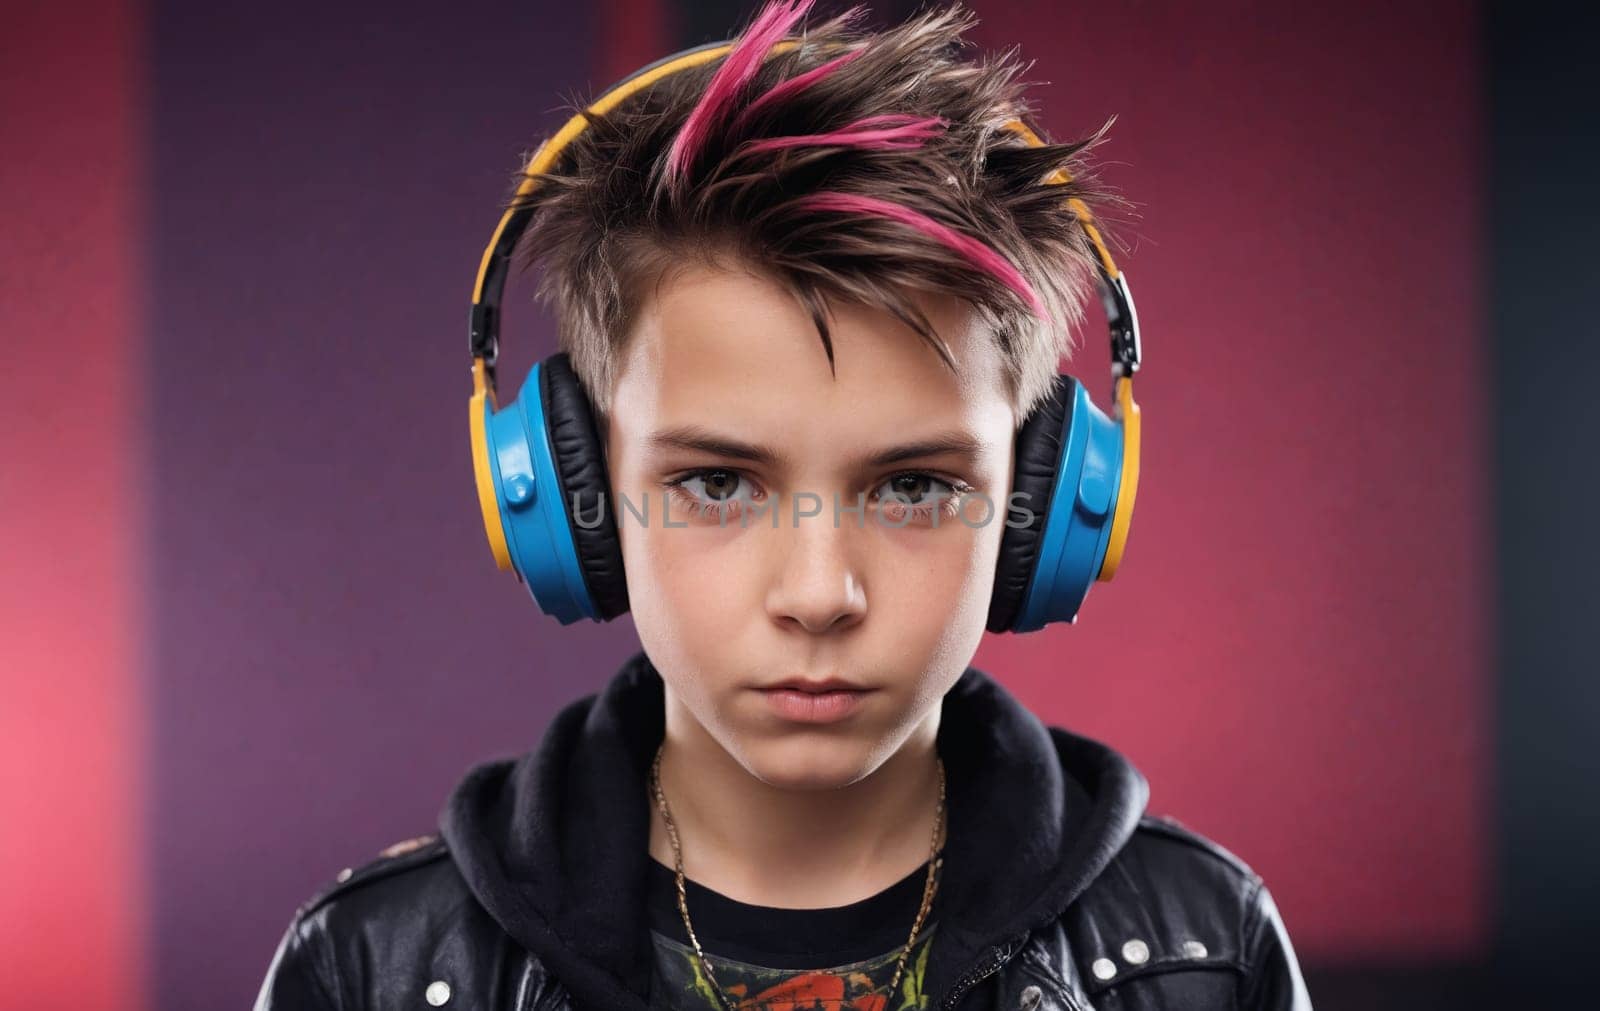 A youth in a leather jacket and earphones is engrossed in music, with an audio gadget on his jaw. The peripheral device enhances the music artists work